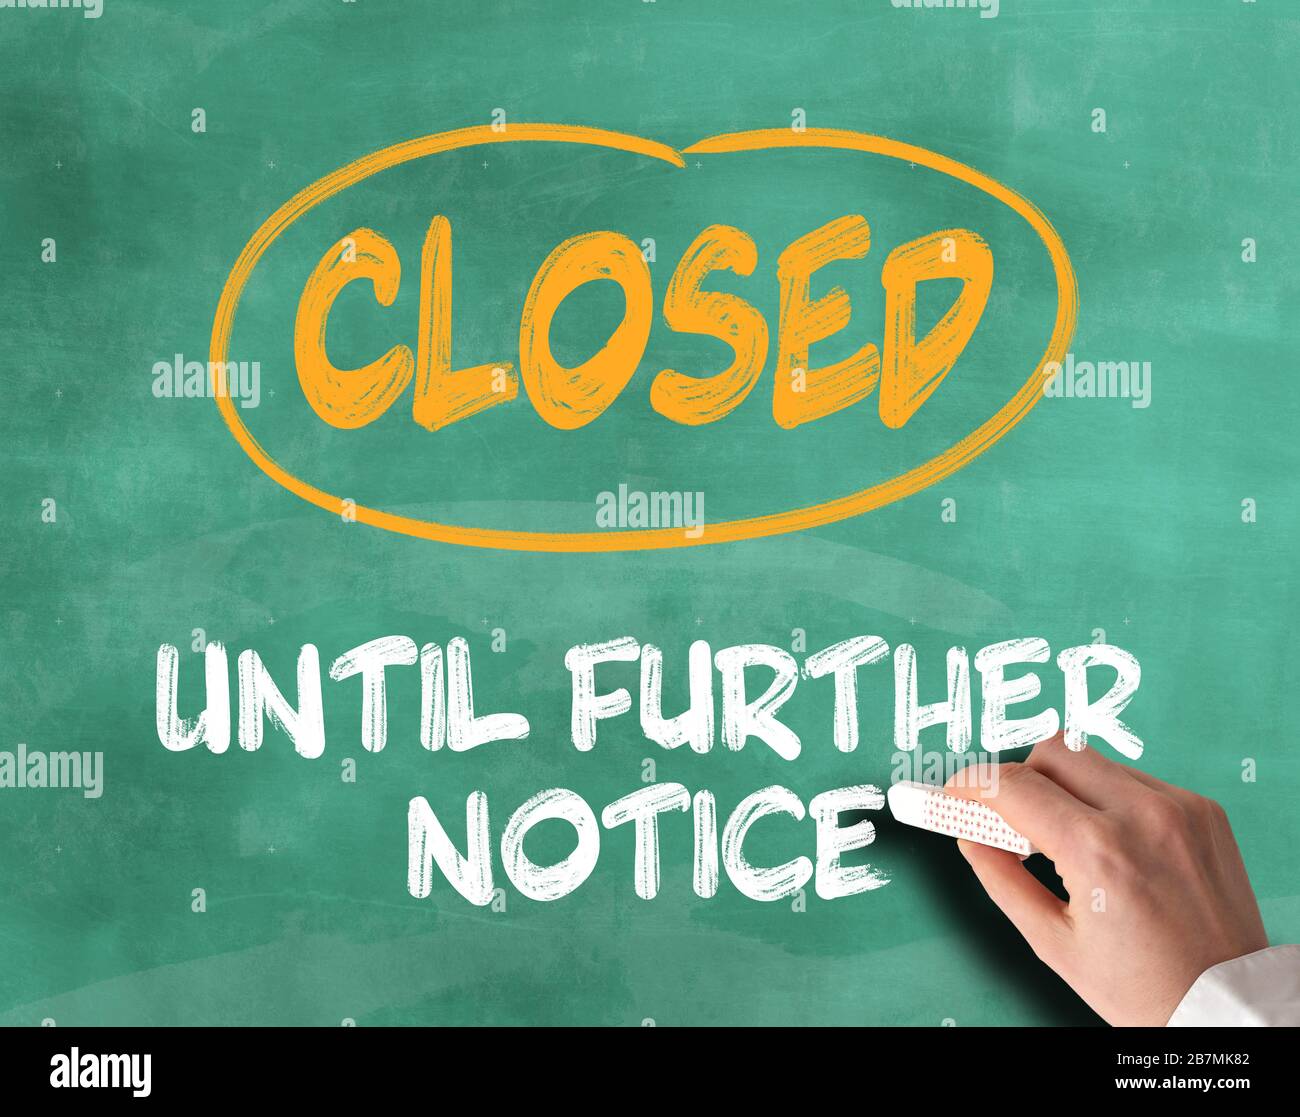 text CLOSED UNTIL FURTHER NOTICE on chalkboard, schools and shops and retail stores closed during corona outbreak concept Stock Photo